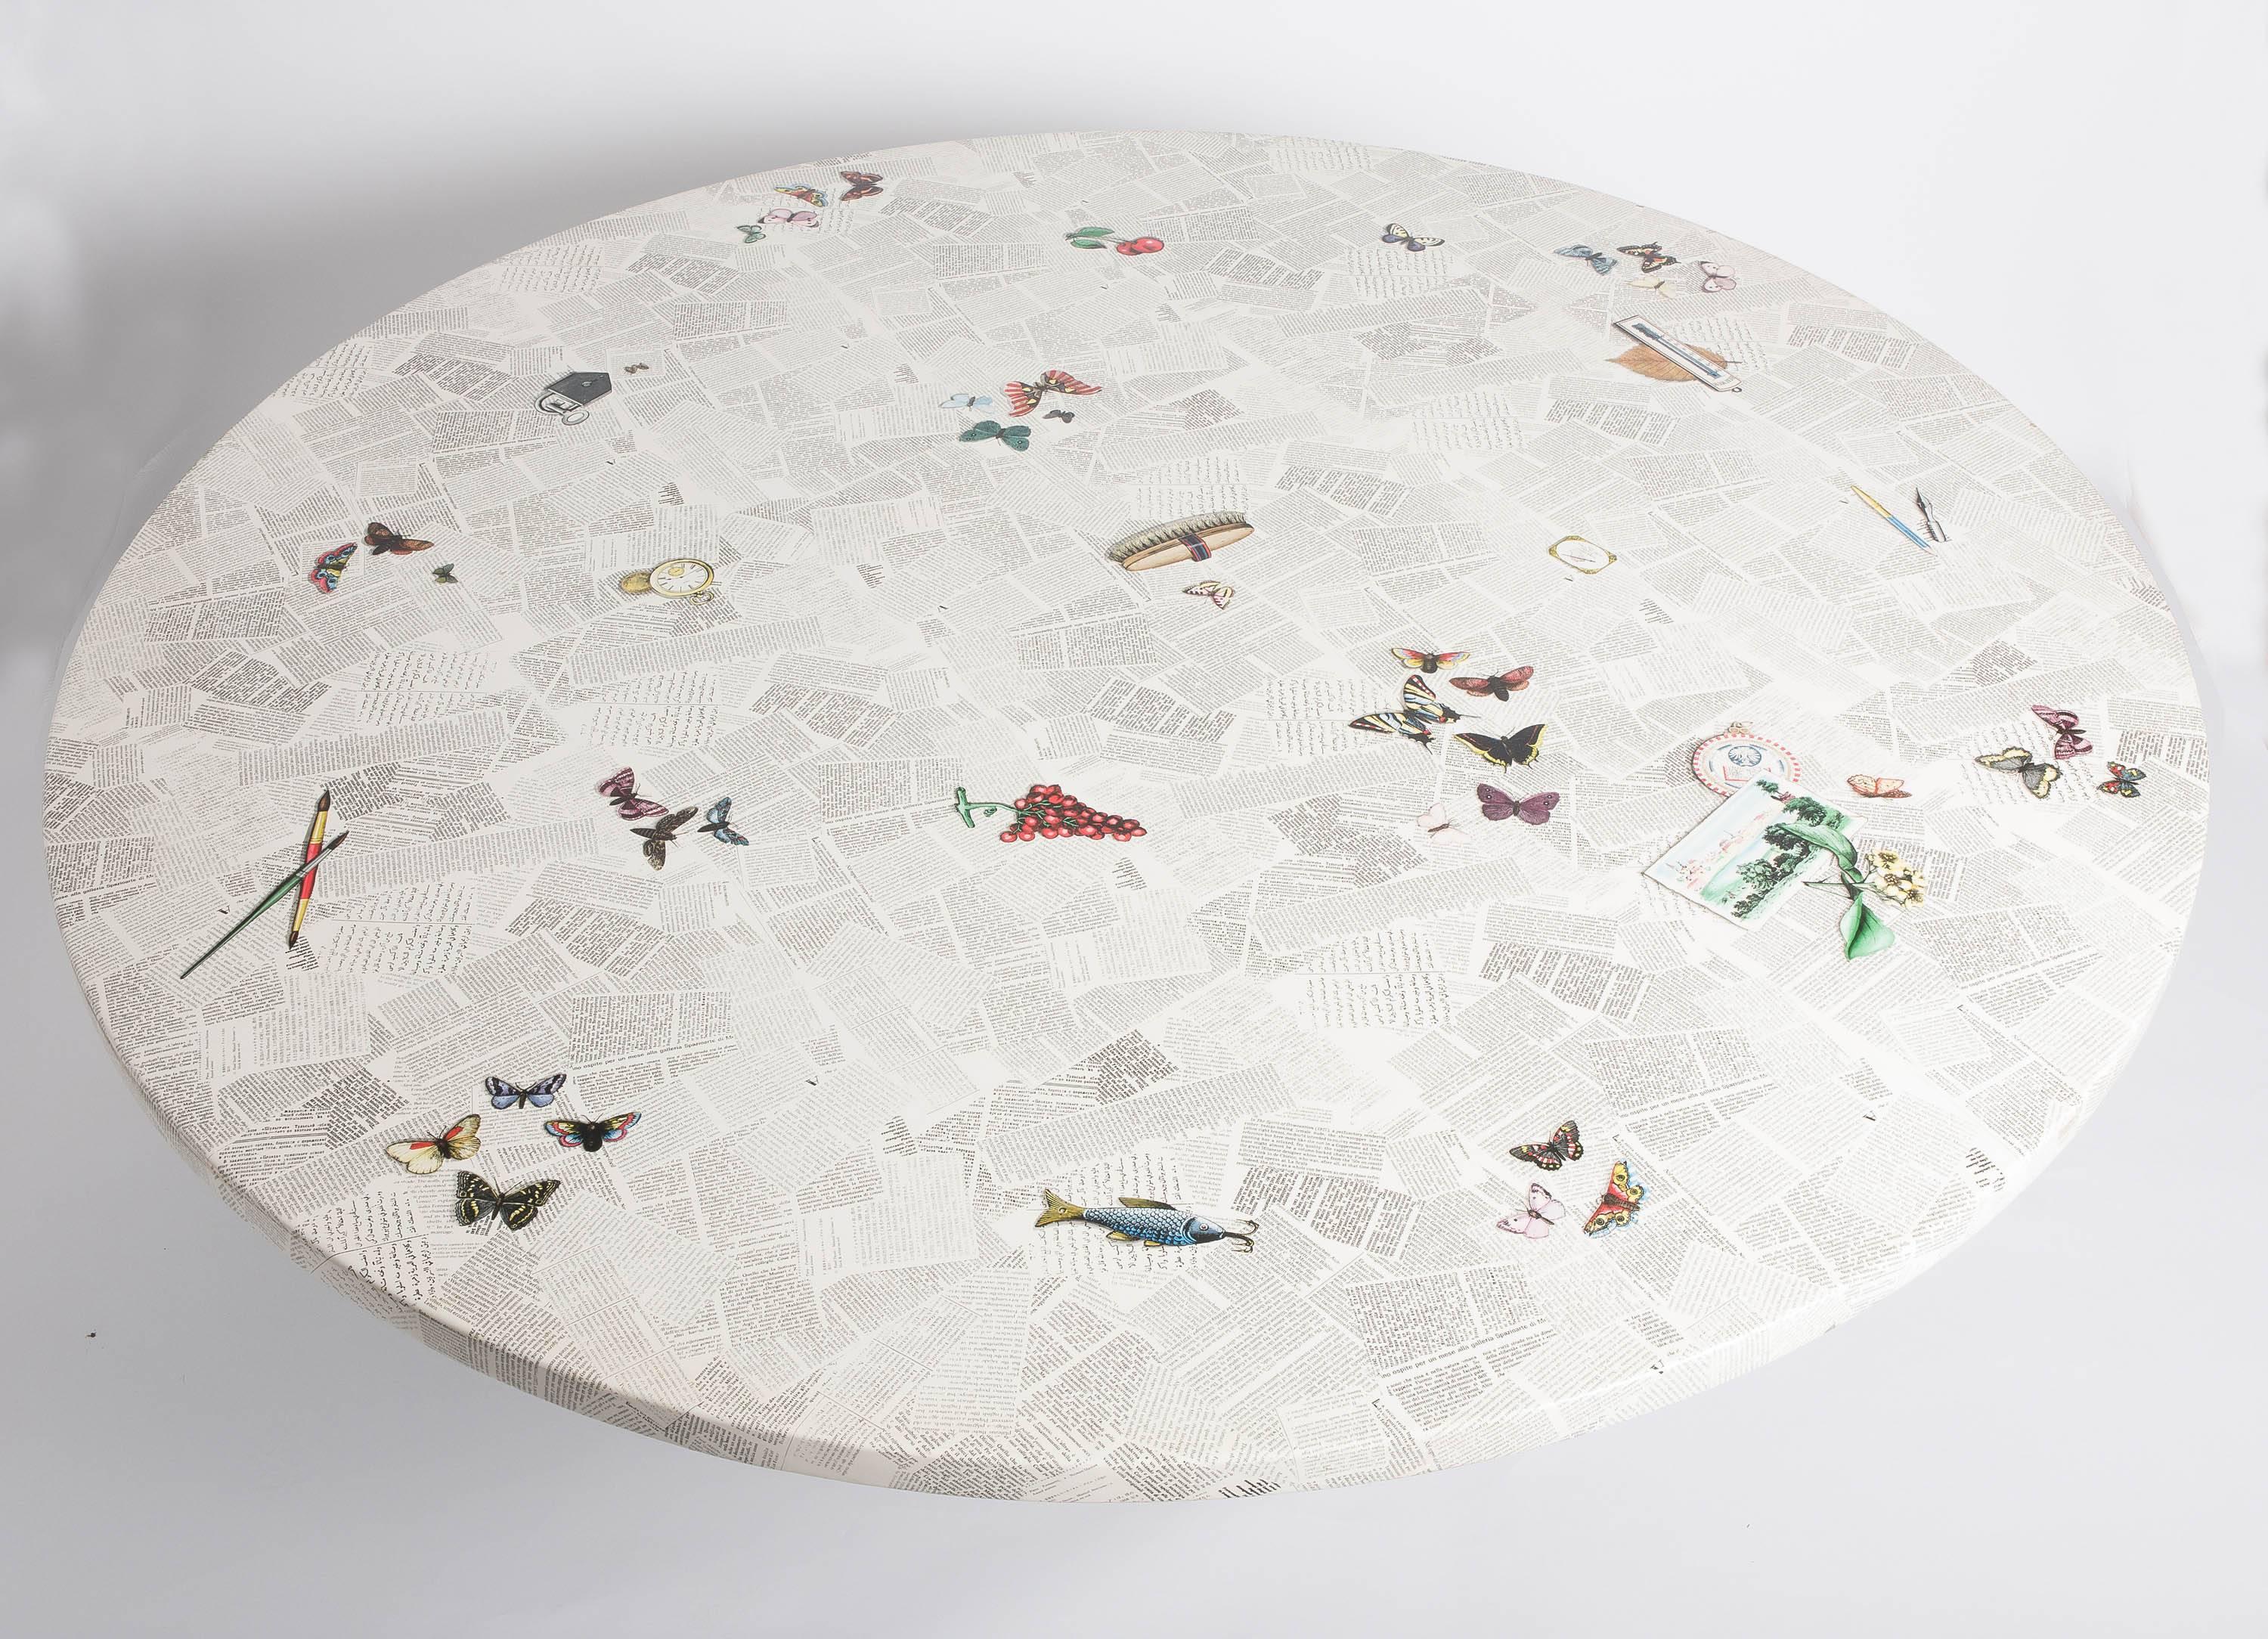 A very rare large centre table by Barnaba Fornasetti.
“Ultime Notizie”
Lithographically printed and hand colored.
Seats 10-12 people.
Wood, lacquer and metal base,
Italy, circa 1995.
Measures: 170 cm diameter x 73 cm high.
 